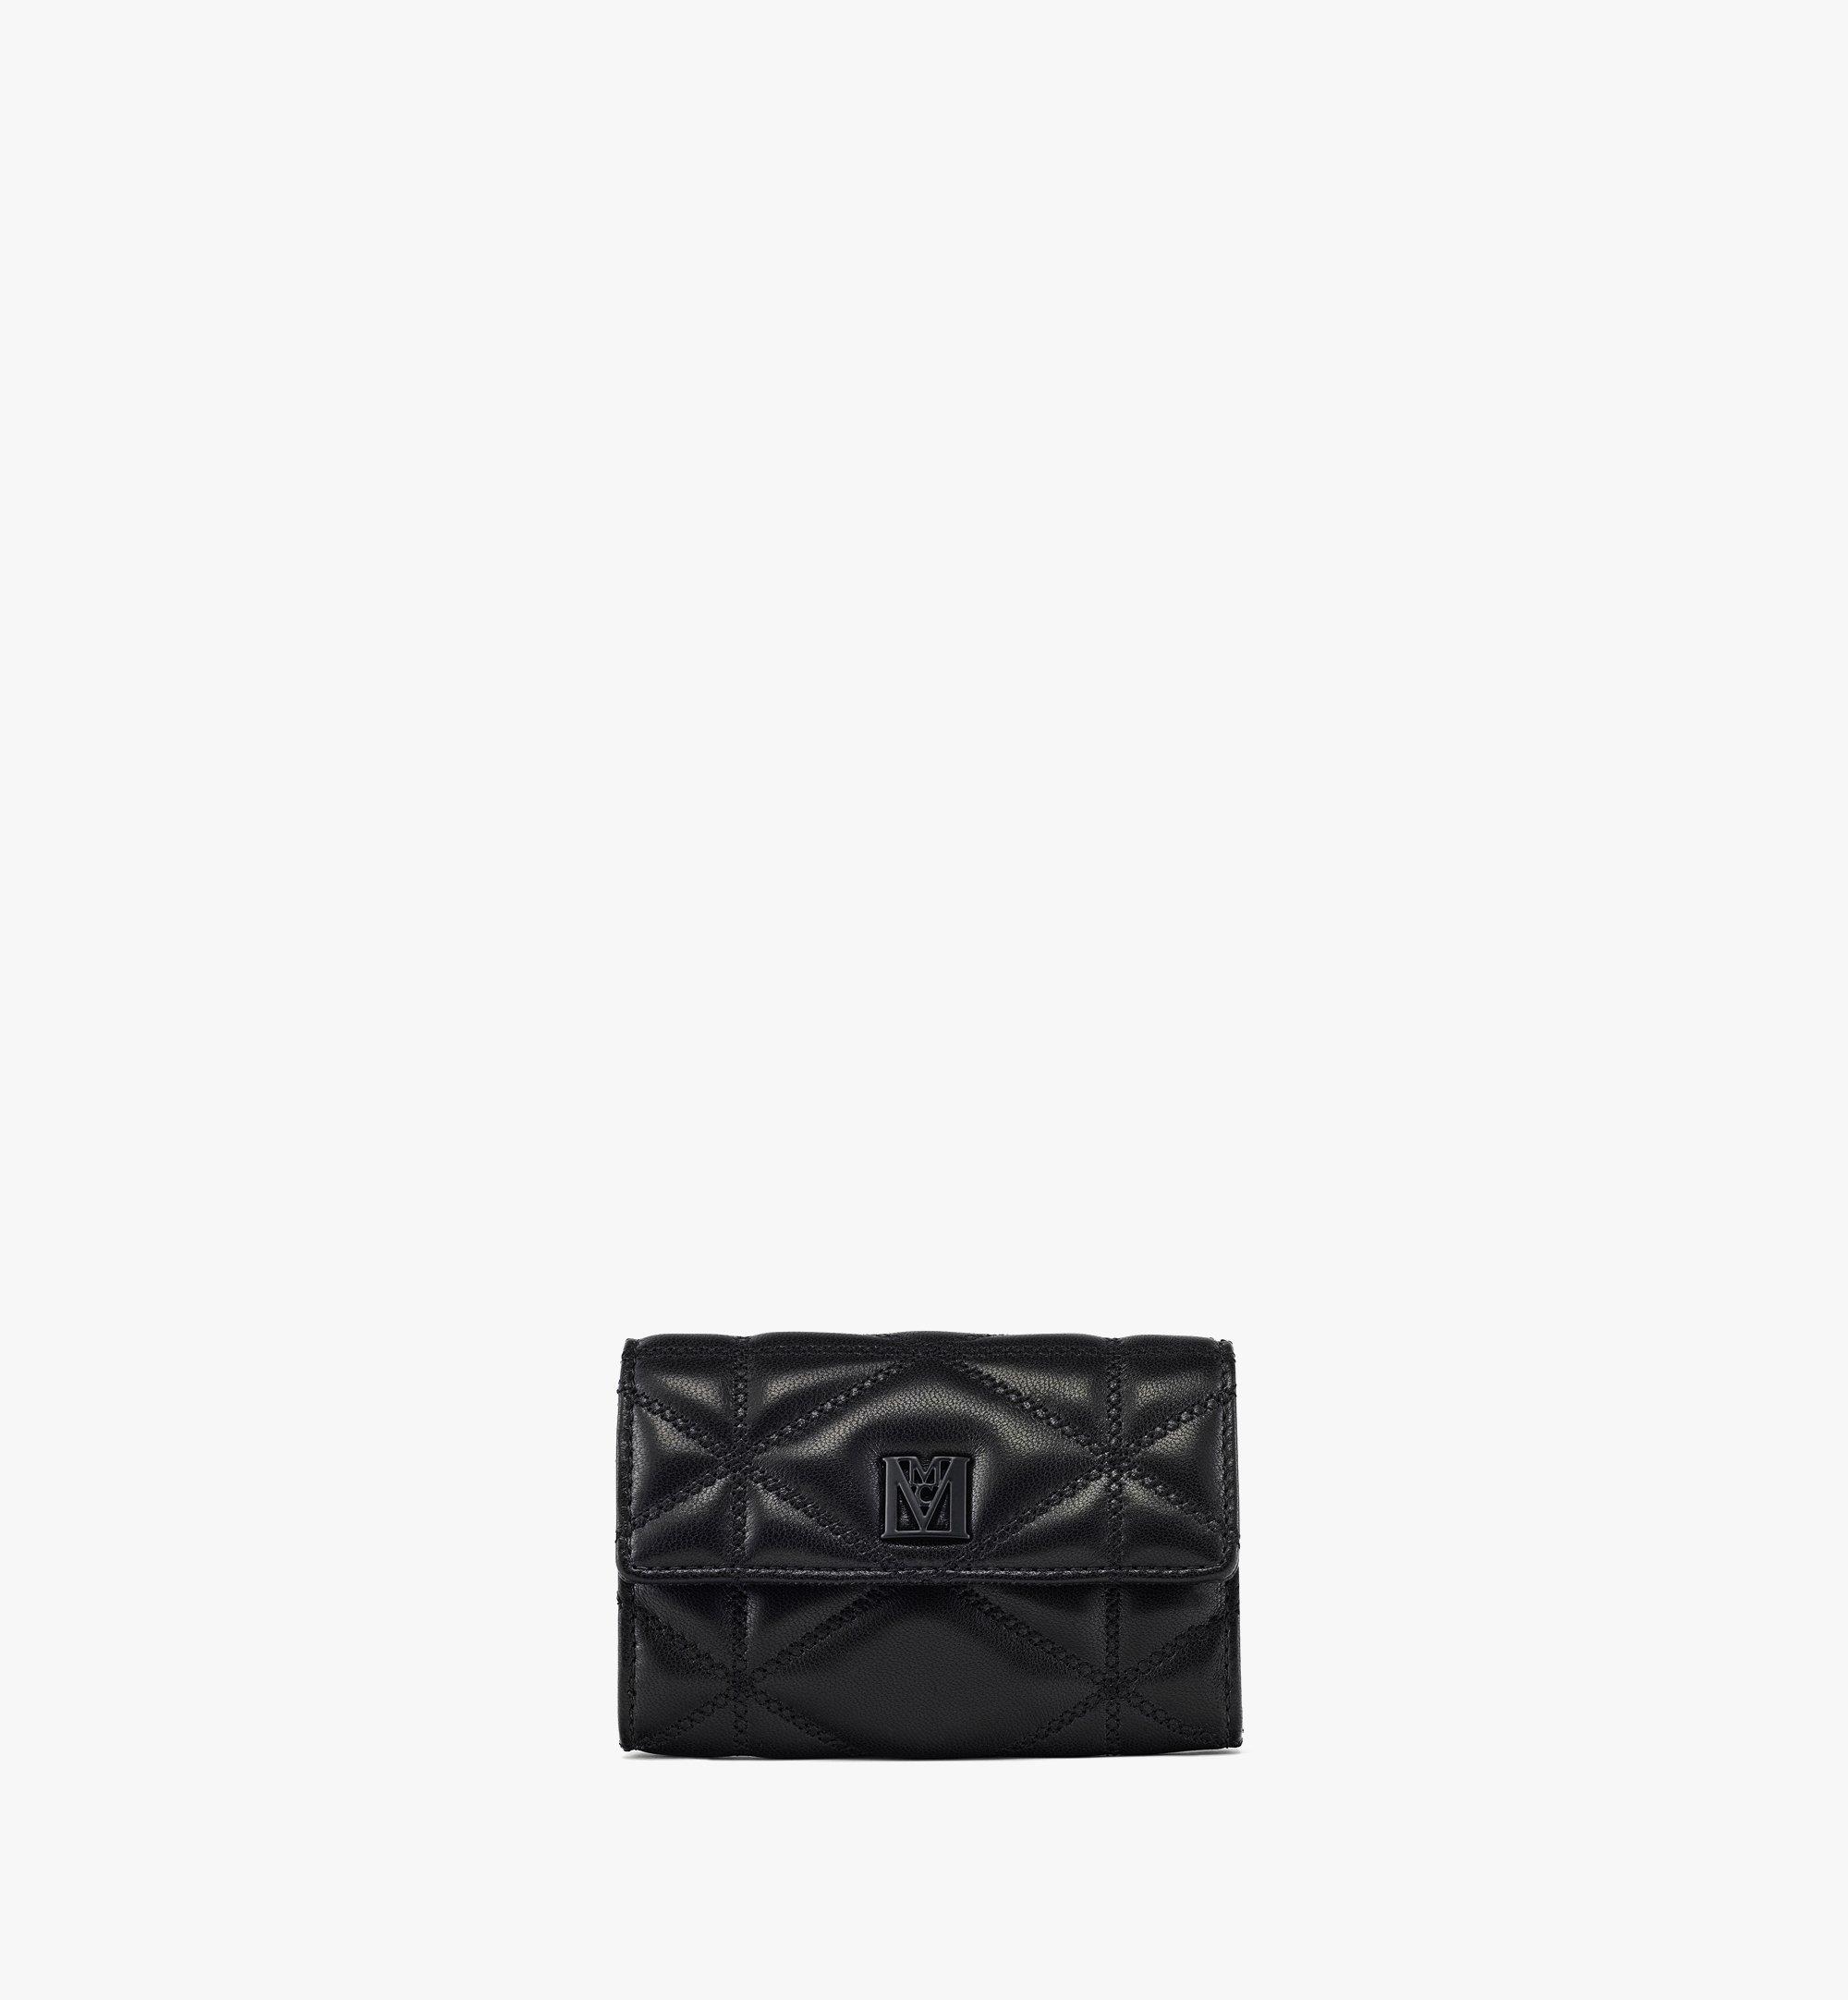 MCM Travia Card Case in Cloud Quilted Leather Black MYADSLM01BK001 Alternate View 1